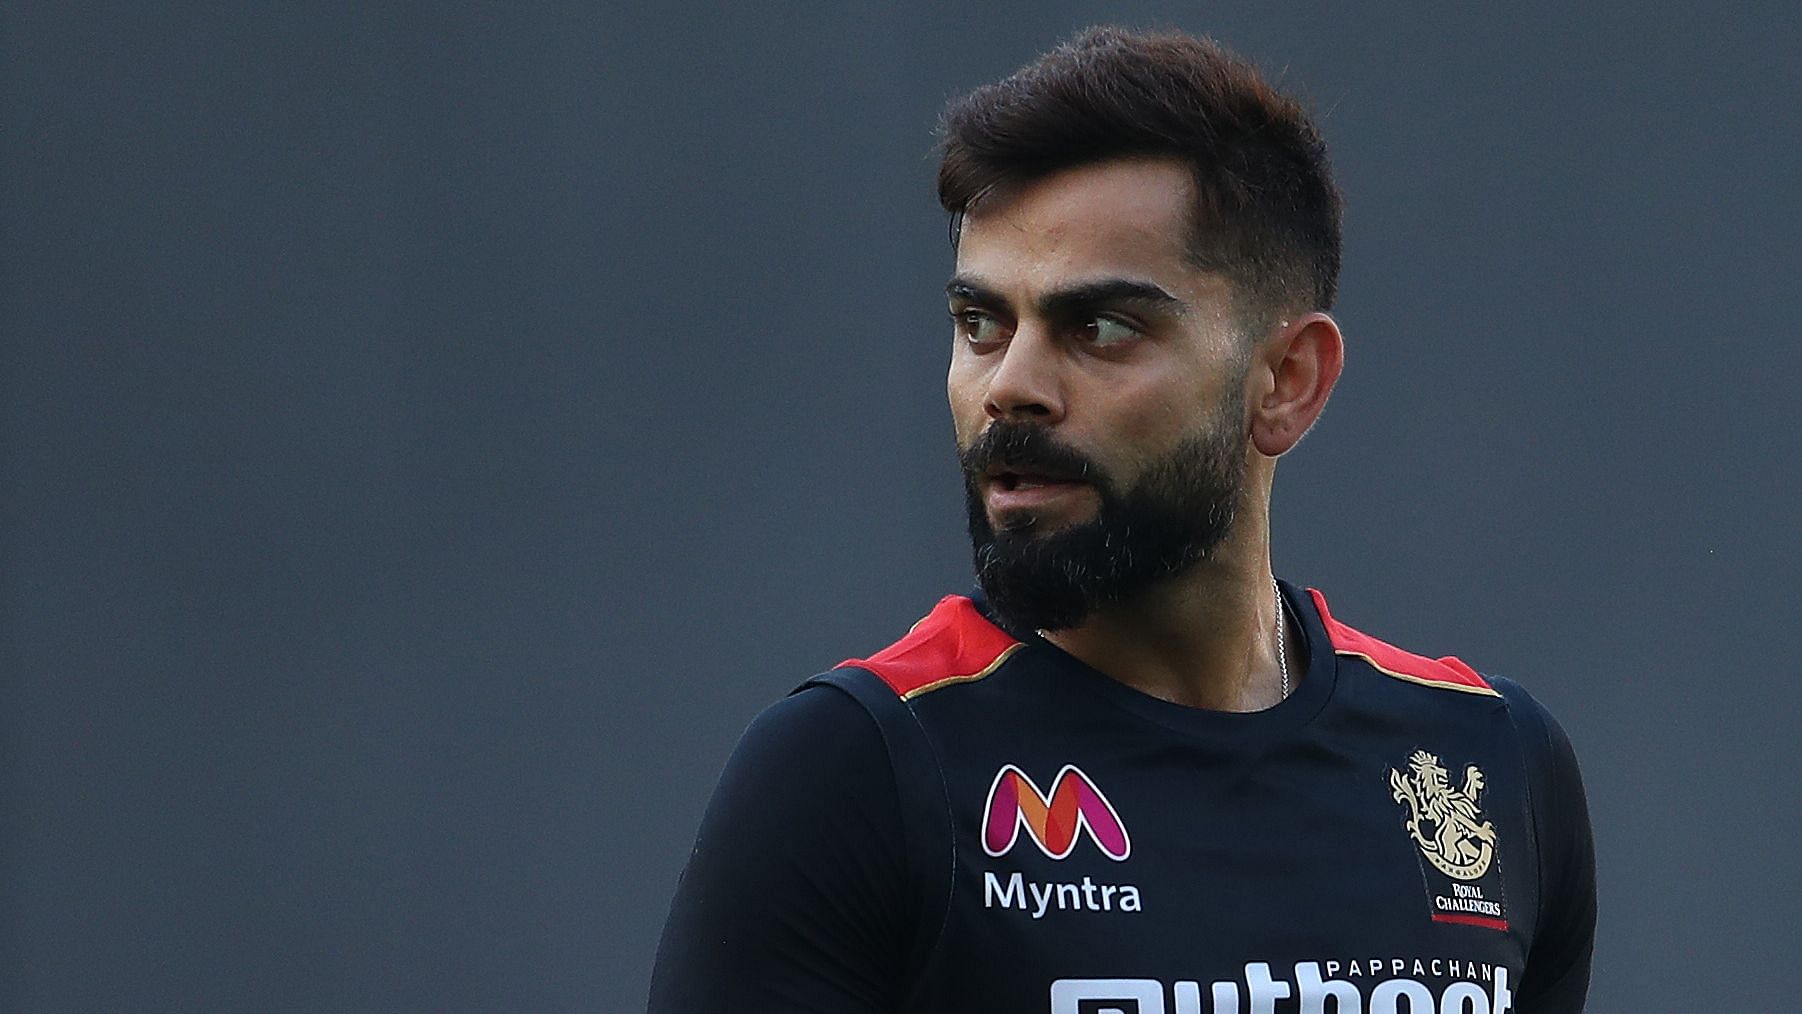 IPL 2020: Royal Challengers Bangalore captain Virat Kohli won the toss and opted to field against Kings XI Punjab.